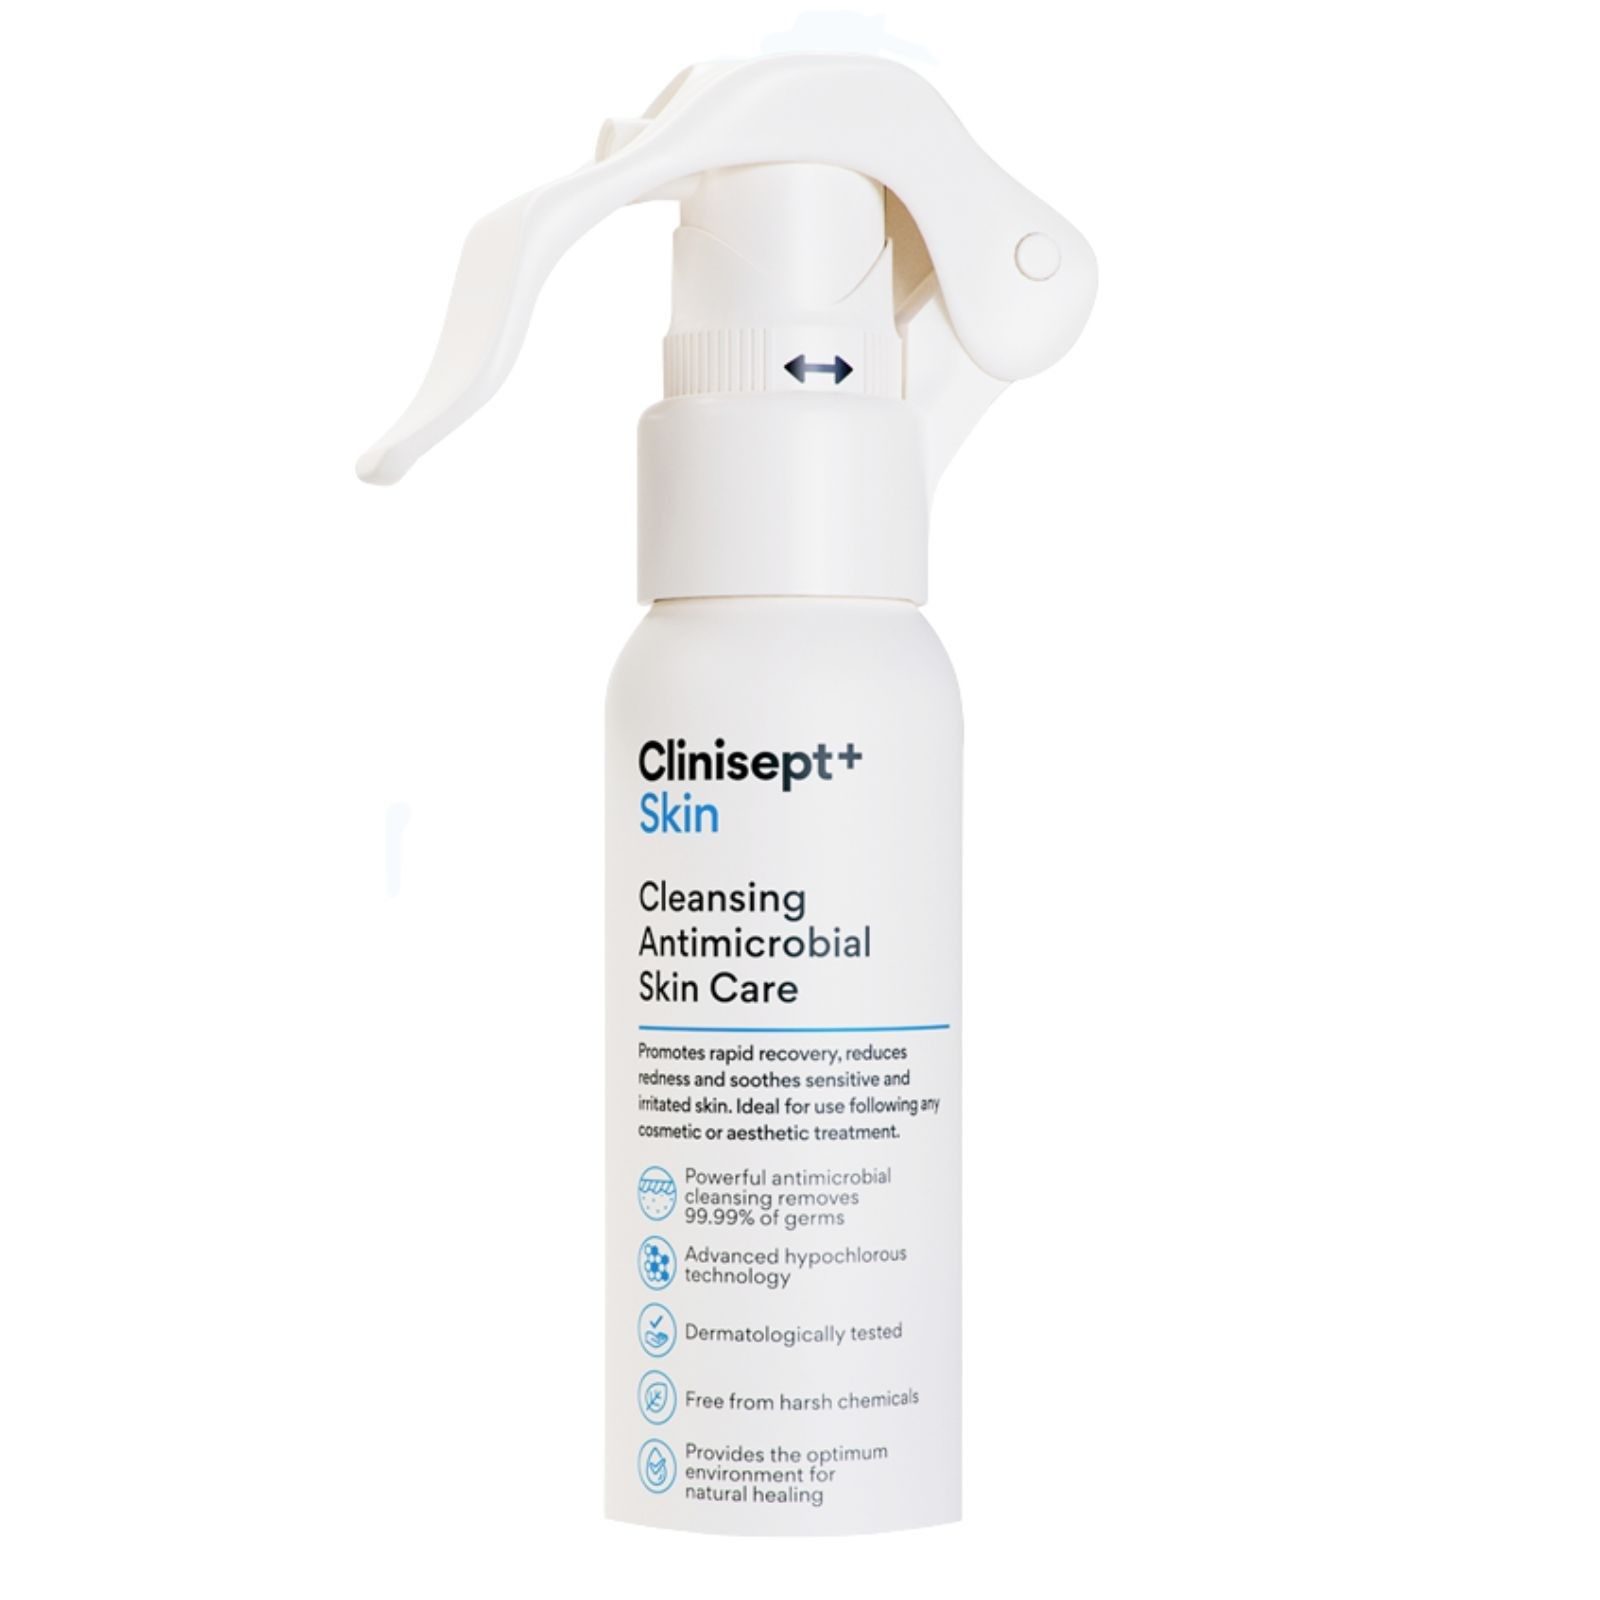 Clinisept+ Skin, Cleansing Antimicrobial Skin Care, 100ml